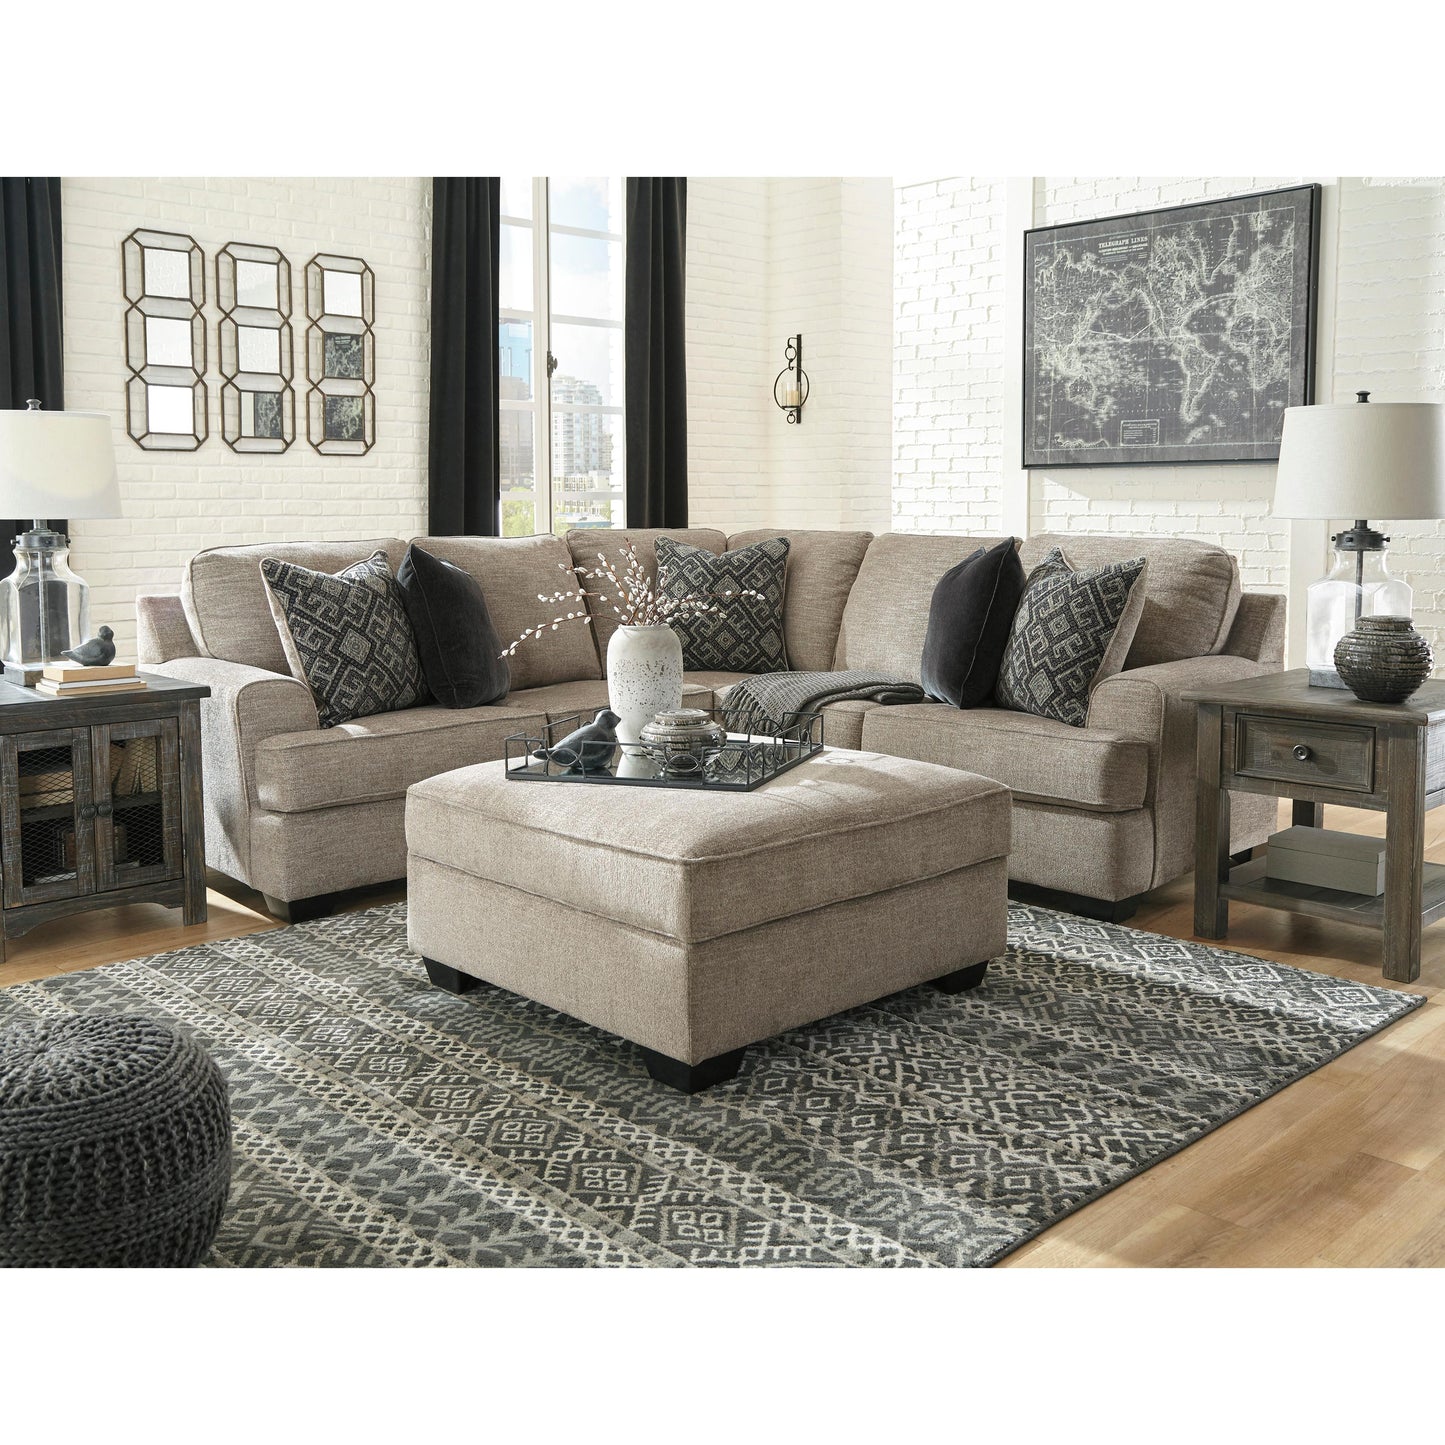 Signature Design by Ashley Bovarian Fabric 2 pc Sectional 5610355/5610349